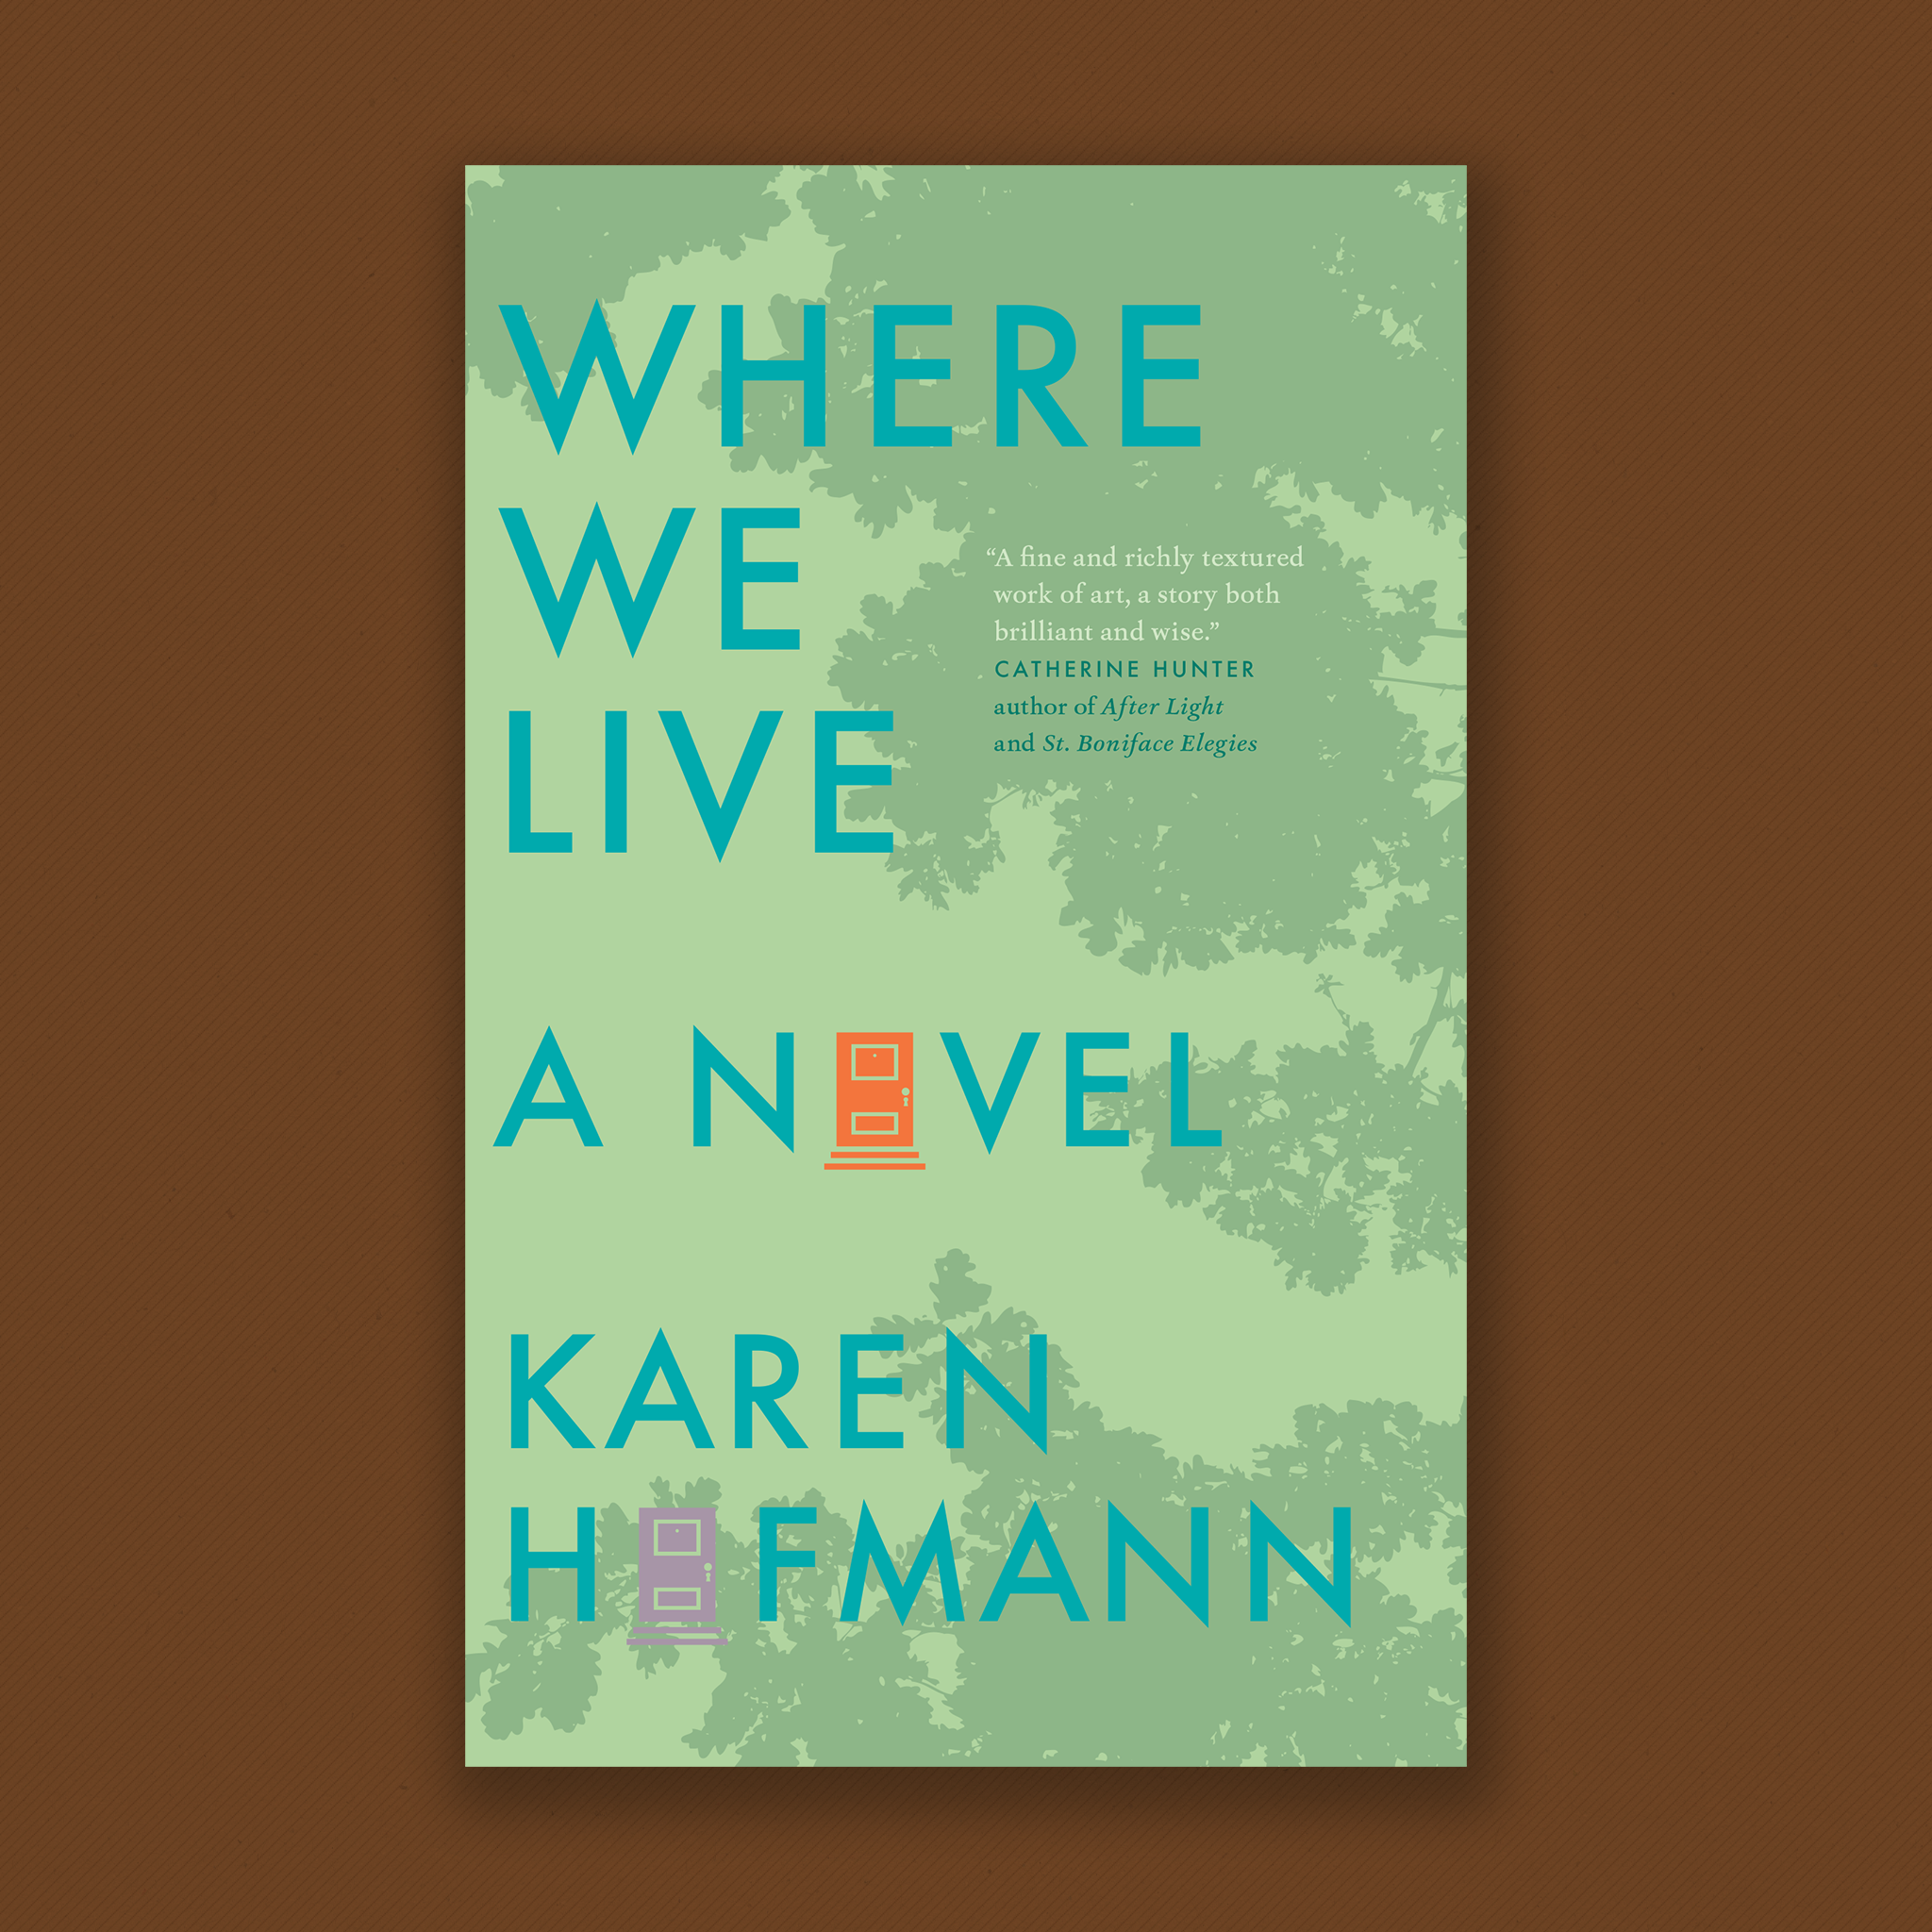 Book cover: Where We Live. A Novel by Karen Hofmann Cover: A light green cover with the abstract shadows of a tree canopy falling across it. The letters of the title are teal and the o’s in “novel” and “Hofmann” have been replaced by colourful yet simplistic drawings of doors. Cover Blurb: A fine and richly textured work of art, a story both brilliant and wise. Catherine Hunter, author of After Light and St. Boniface Elegies.